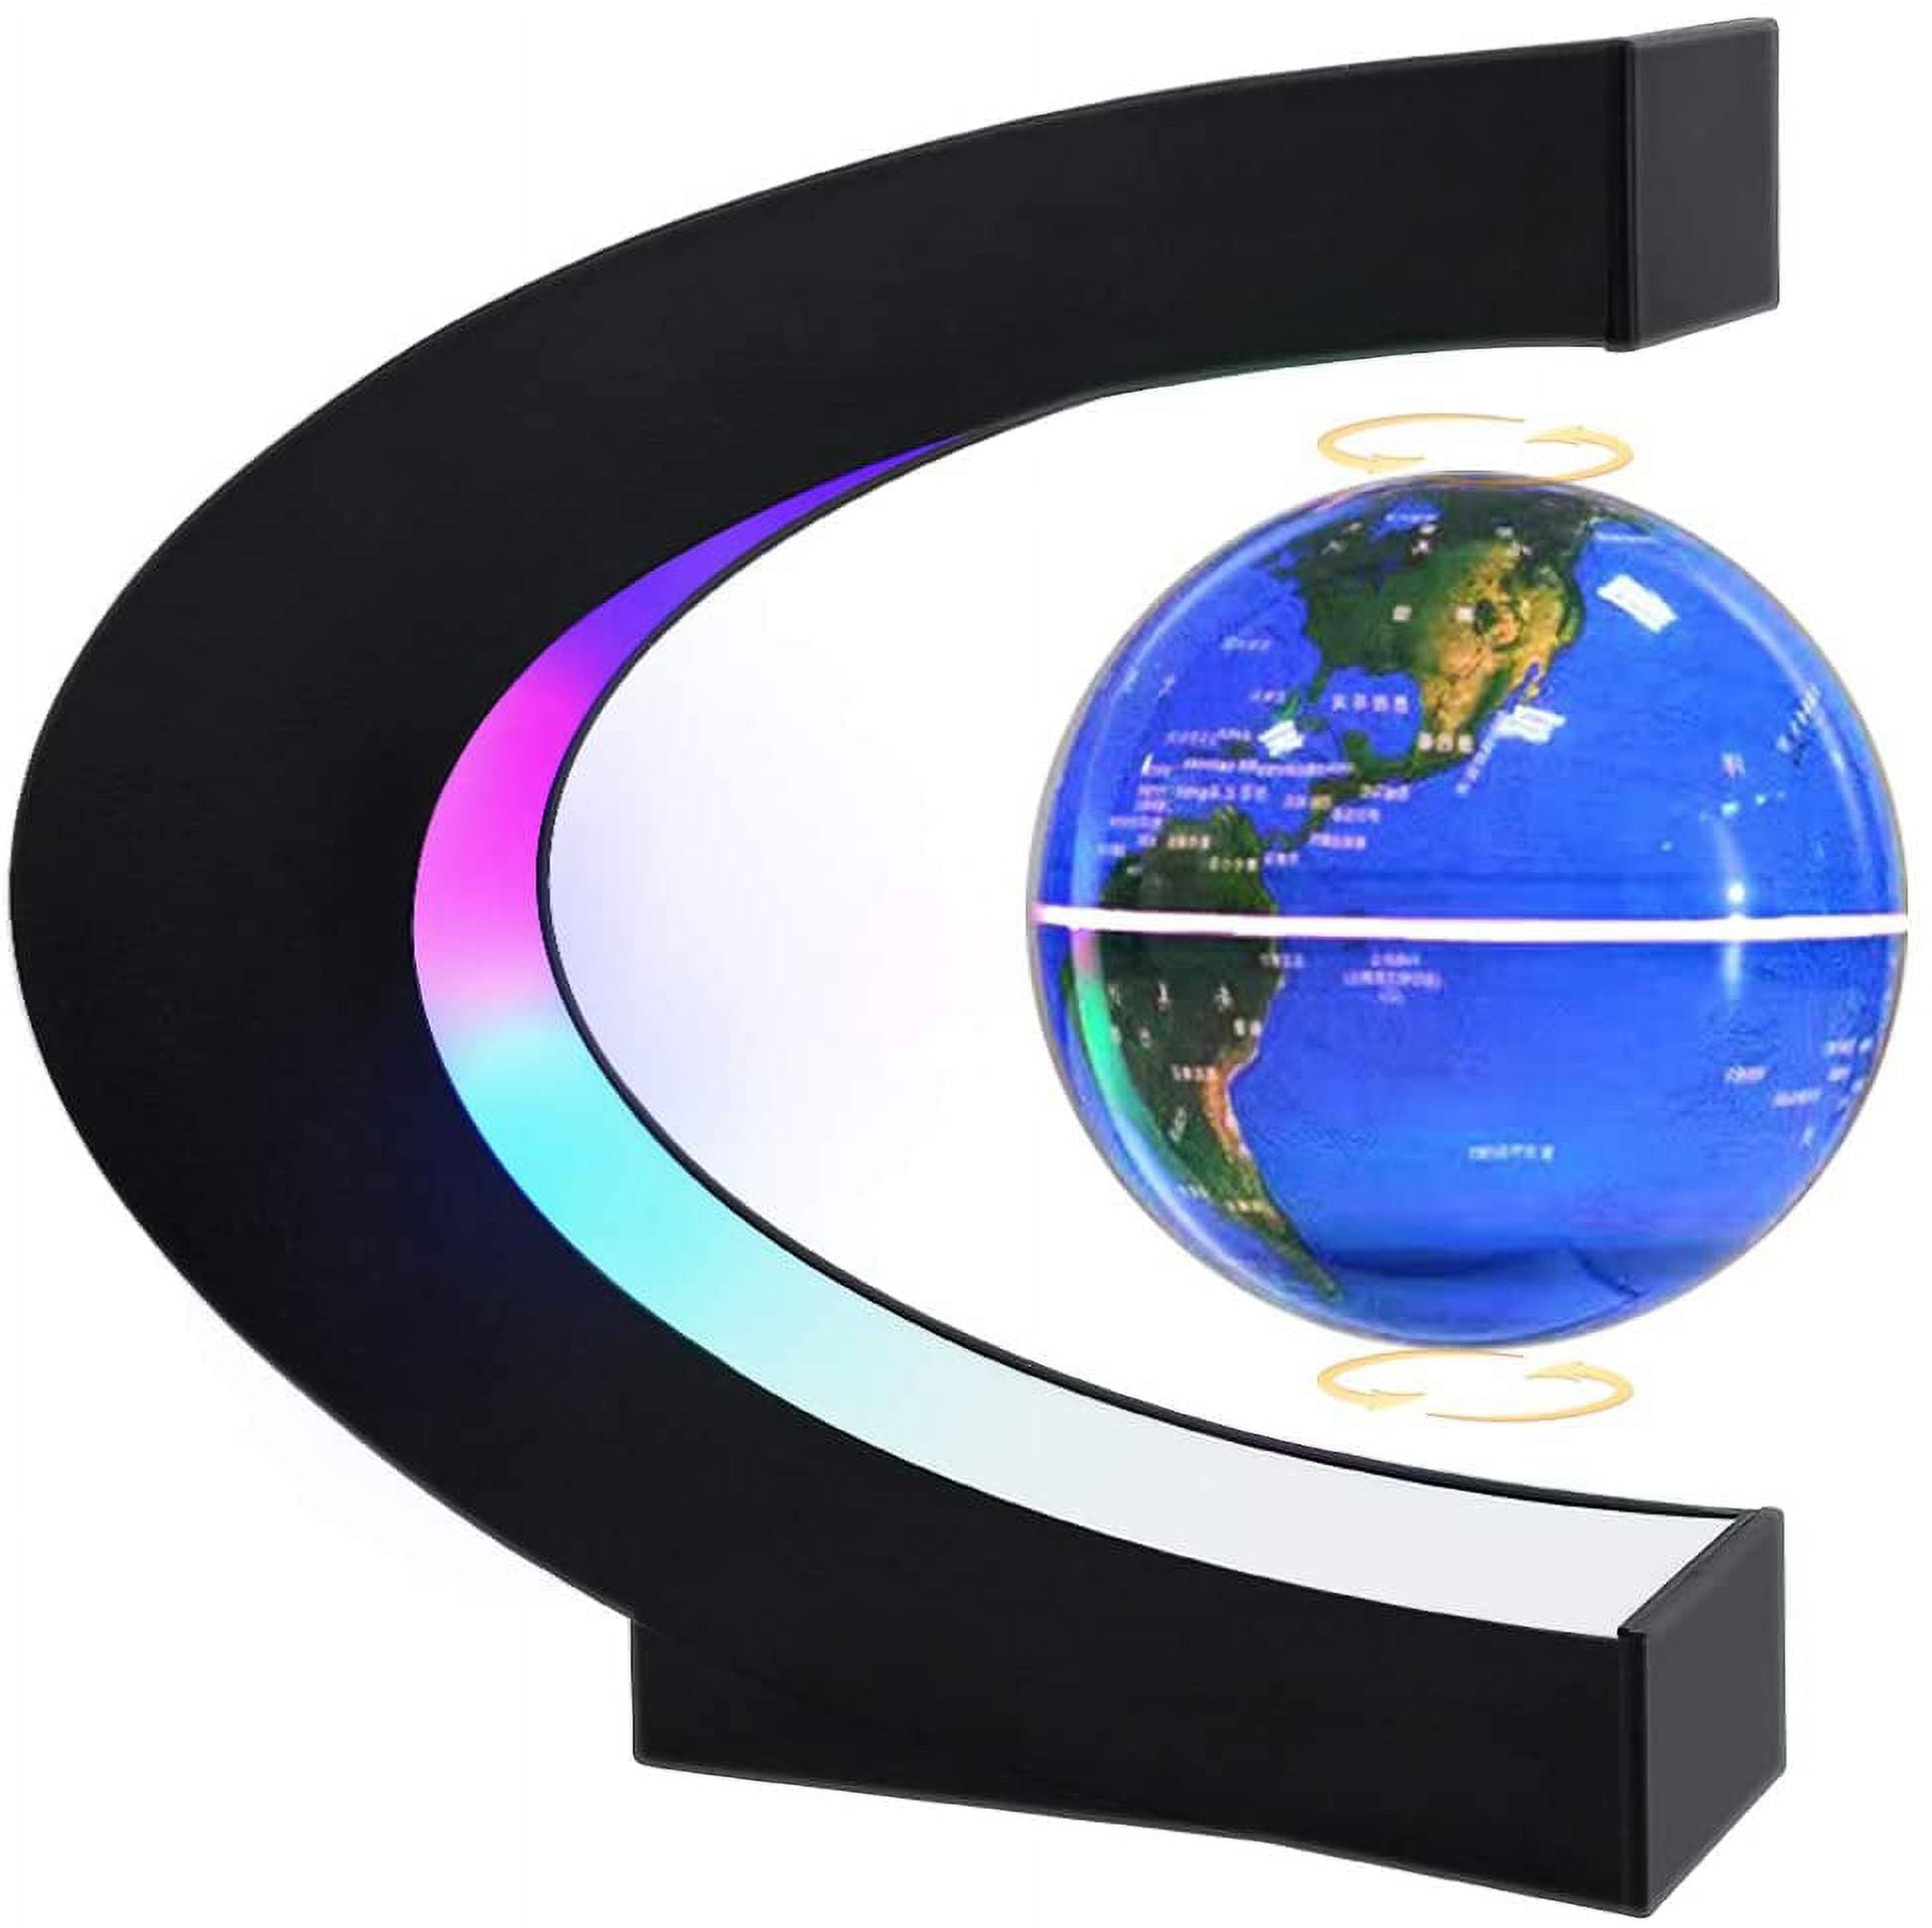  Magnetic Levitation Floating 4in Constellation Globe with Led  Light Lamp Rotating in Midair for Adult, Cool Office Desk Accessories Decor  Gadget Novelty Gift or Tech Science Toy for Men Birthday 